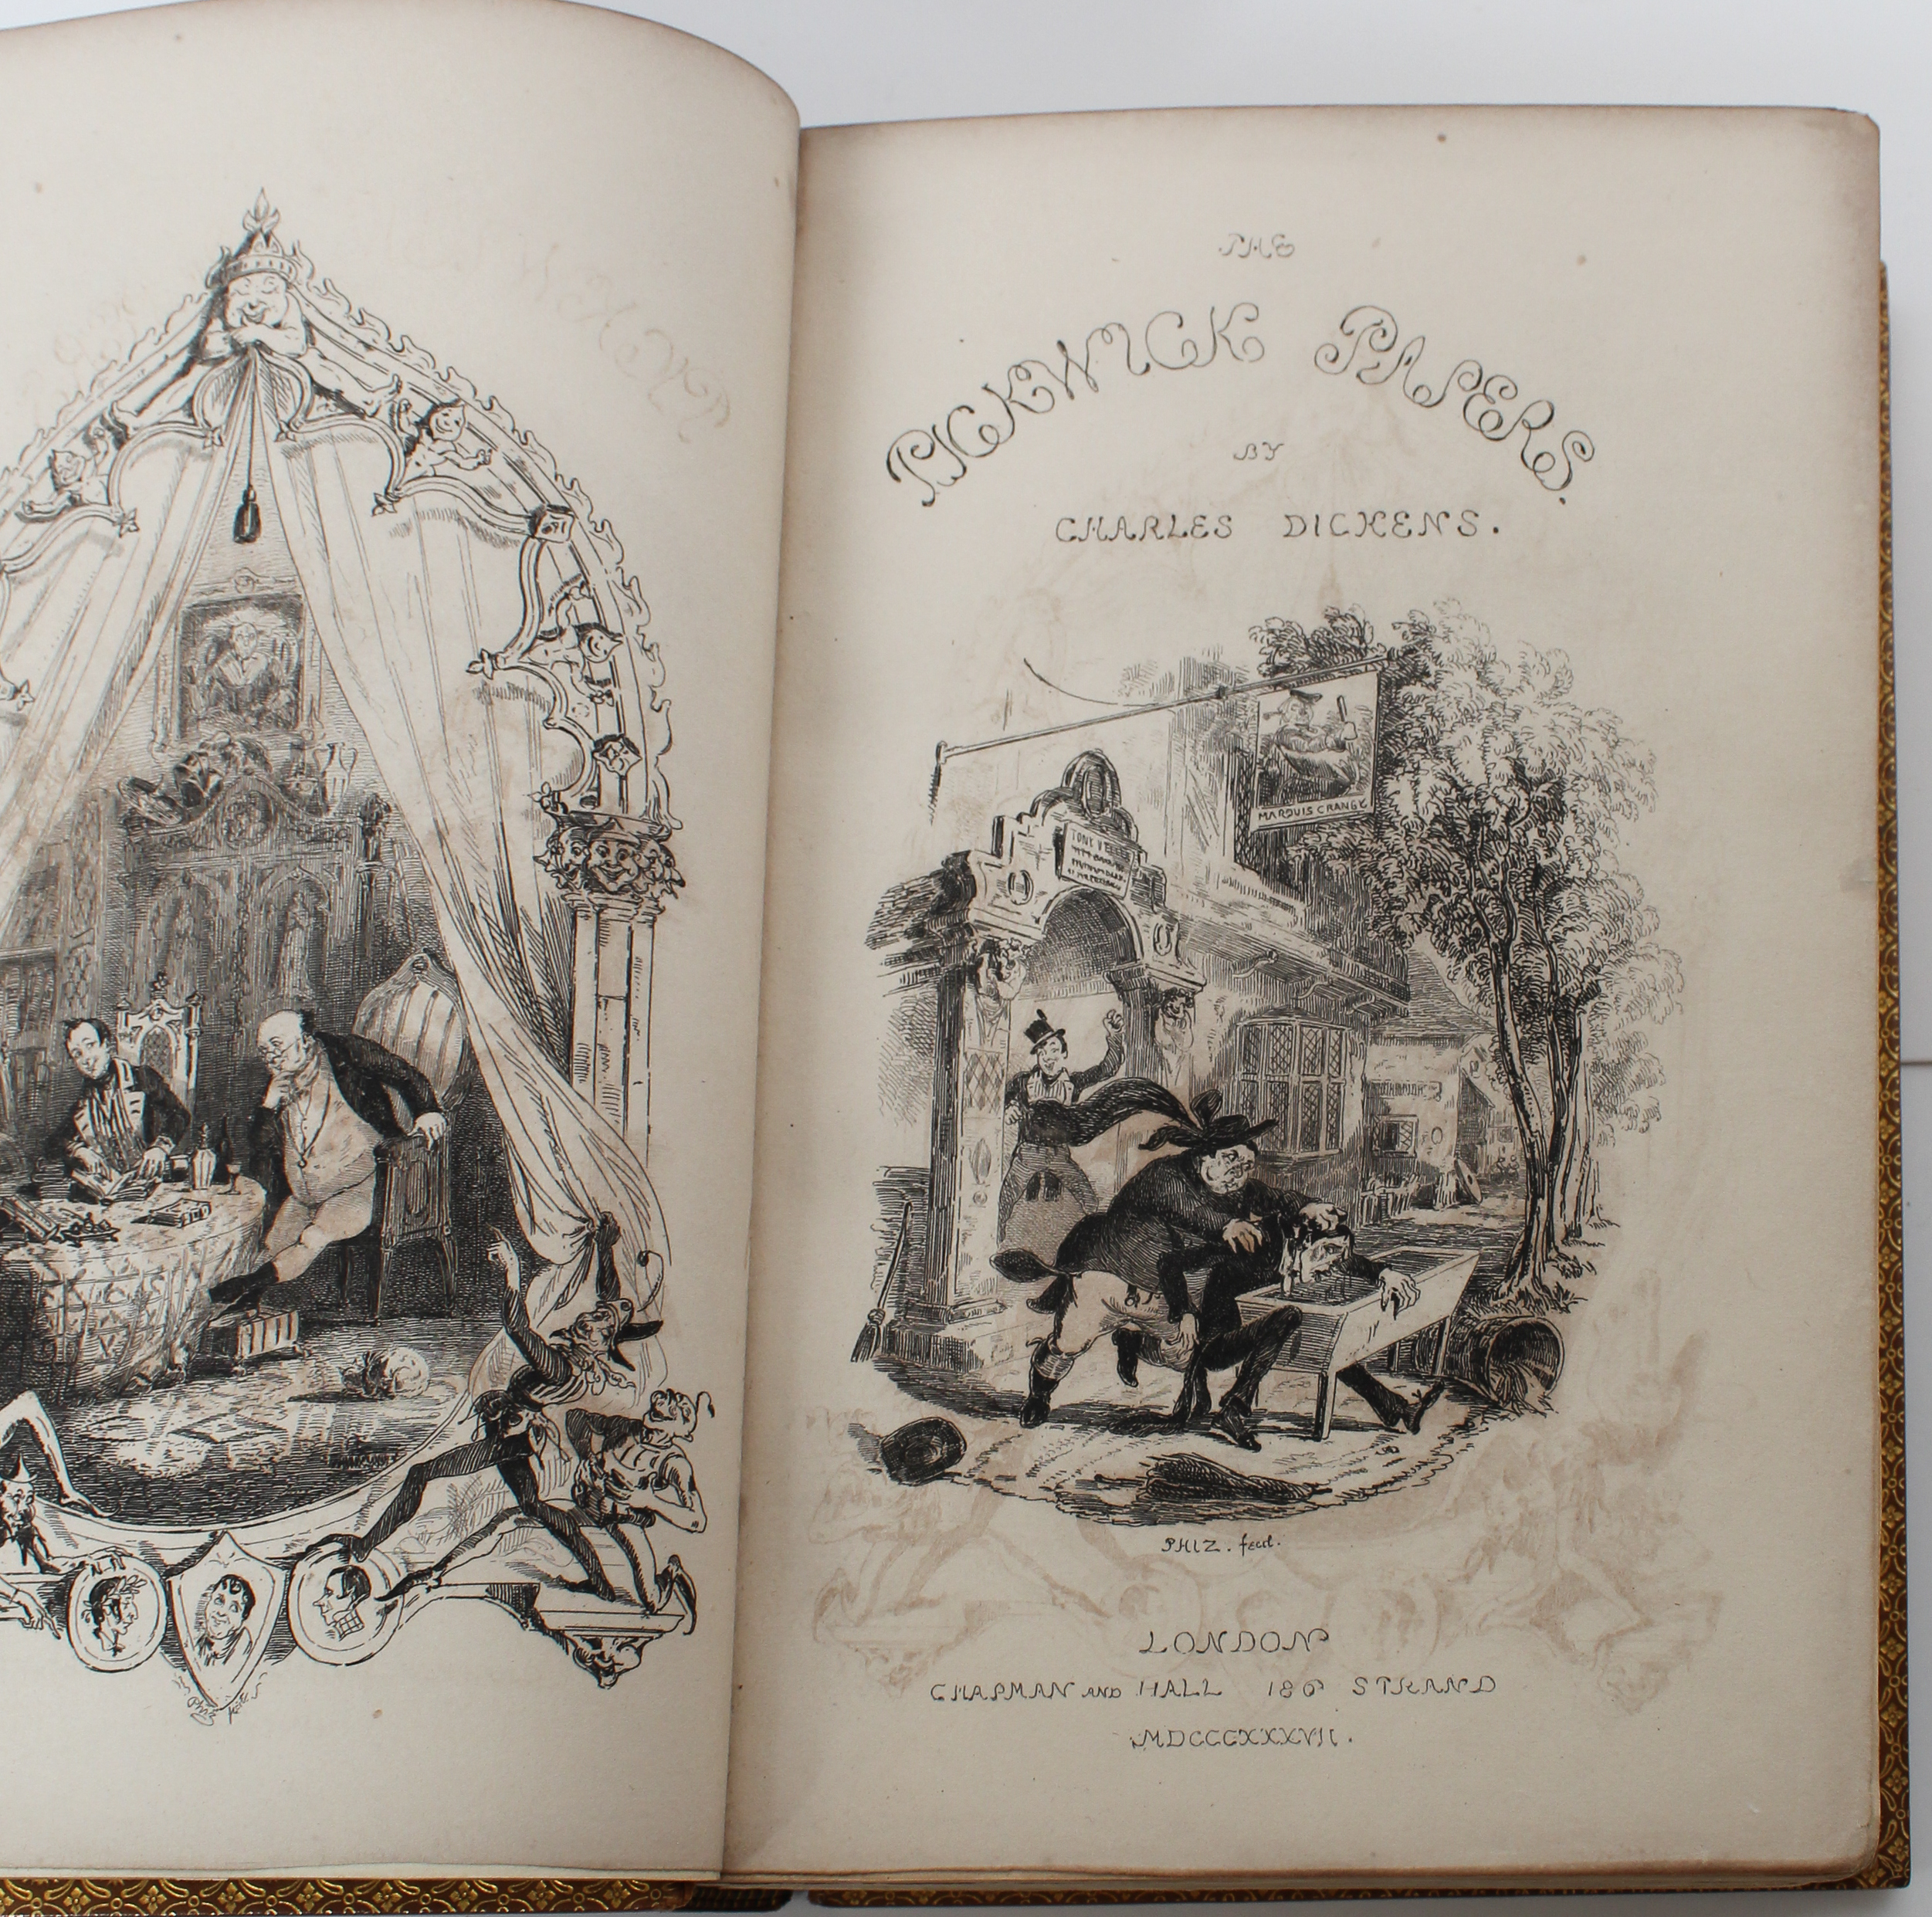 Dickens, Pickwick Papers, Book Form 1836 - Image 3 of 6